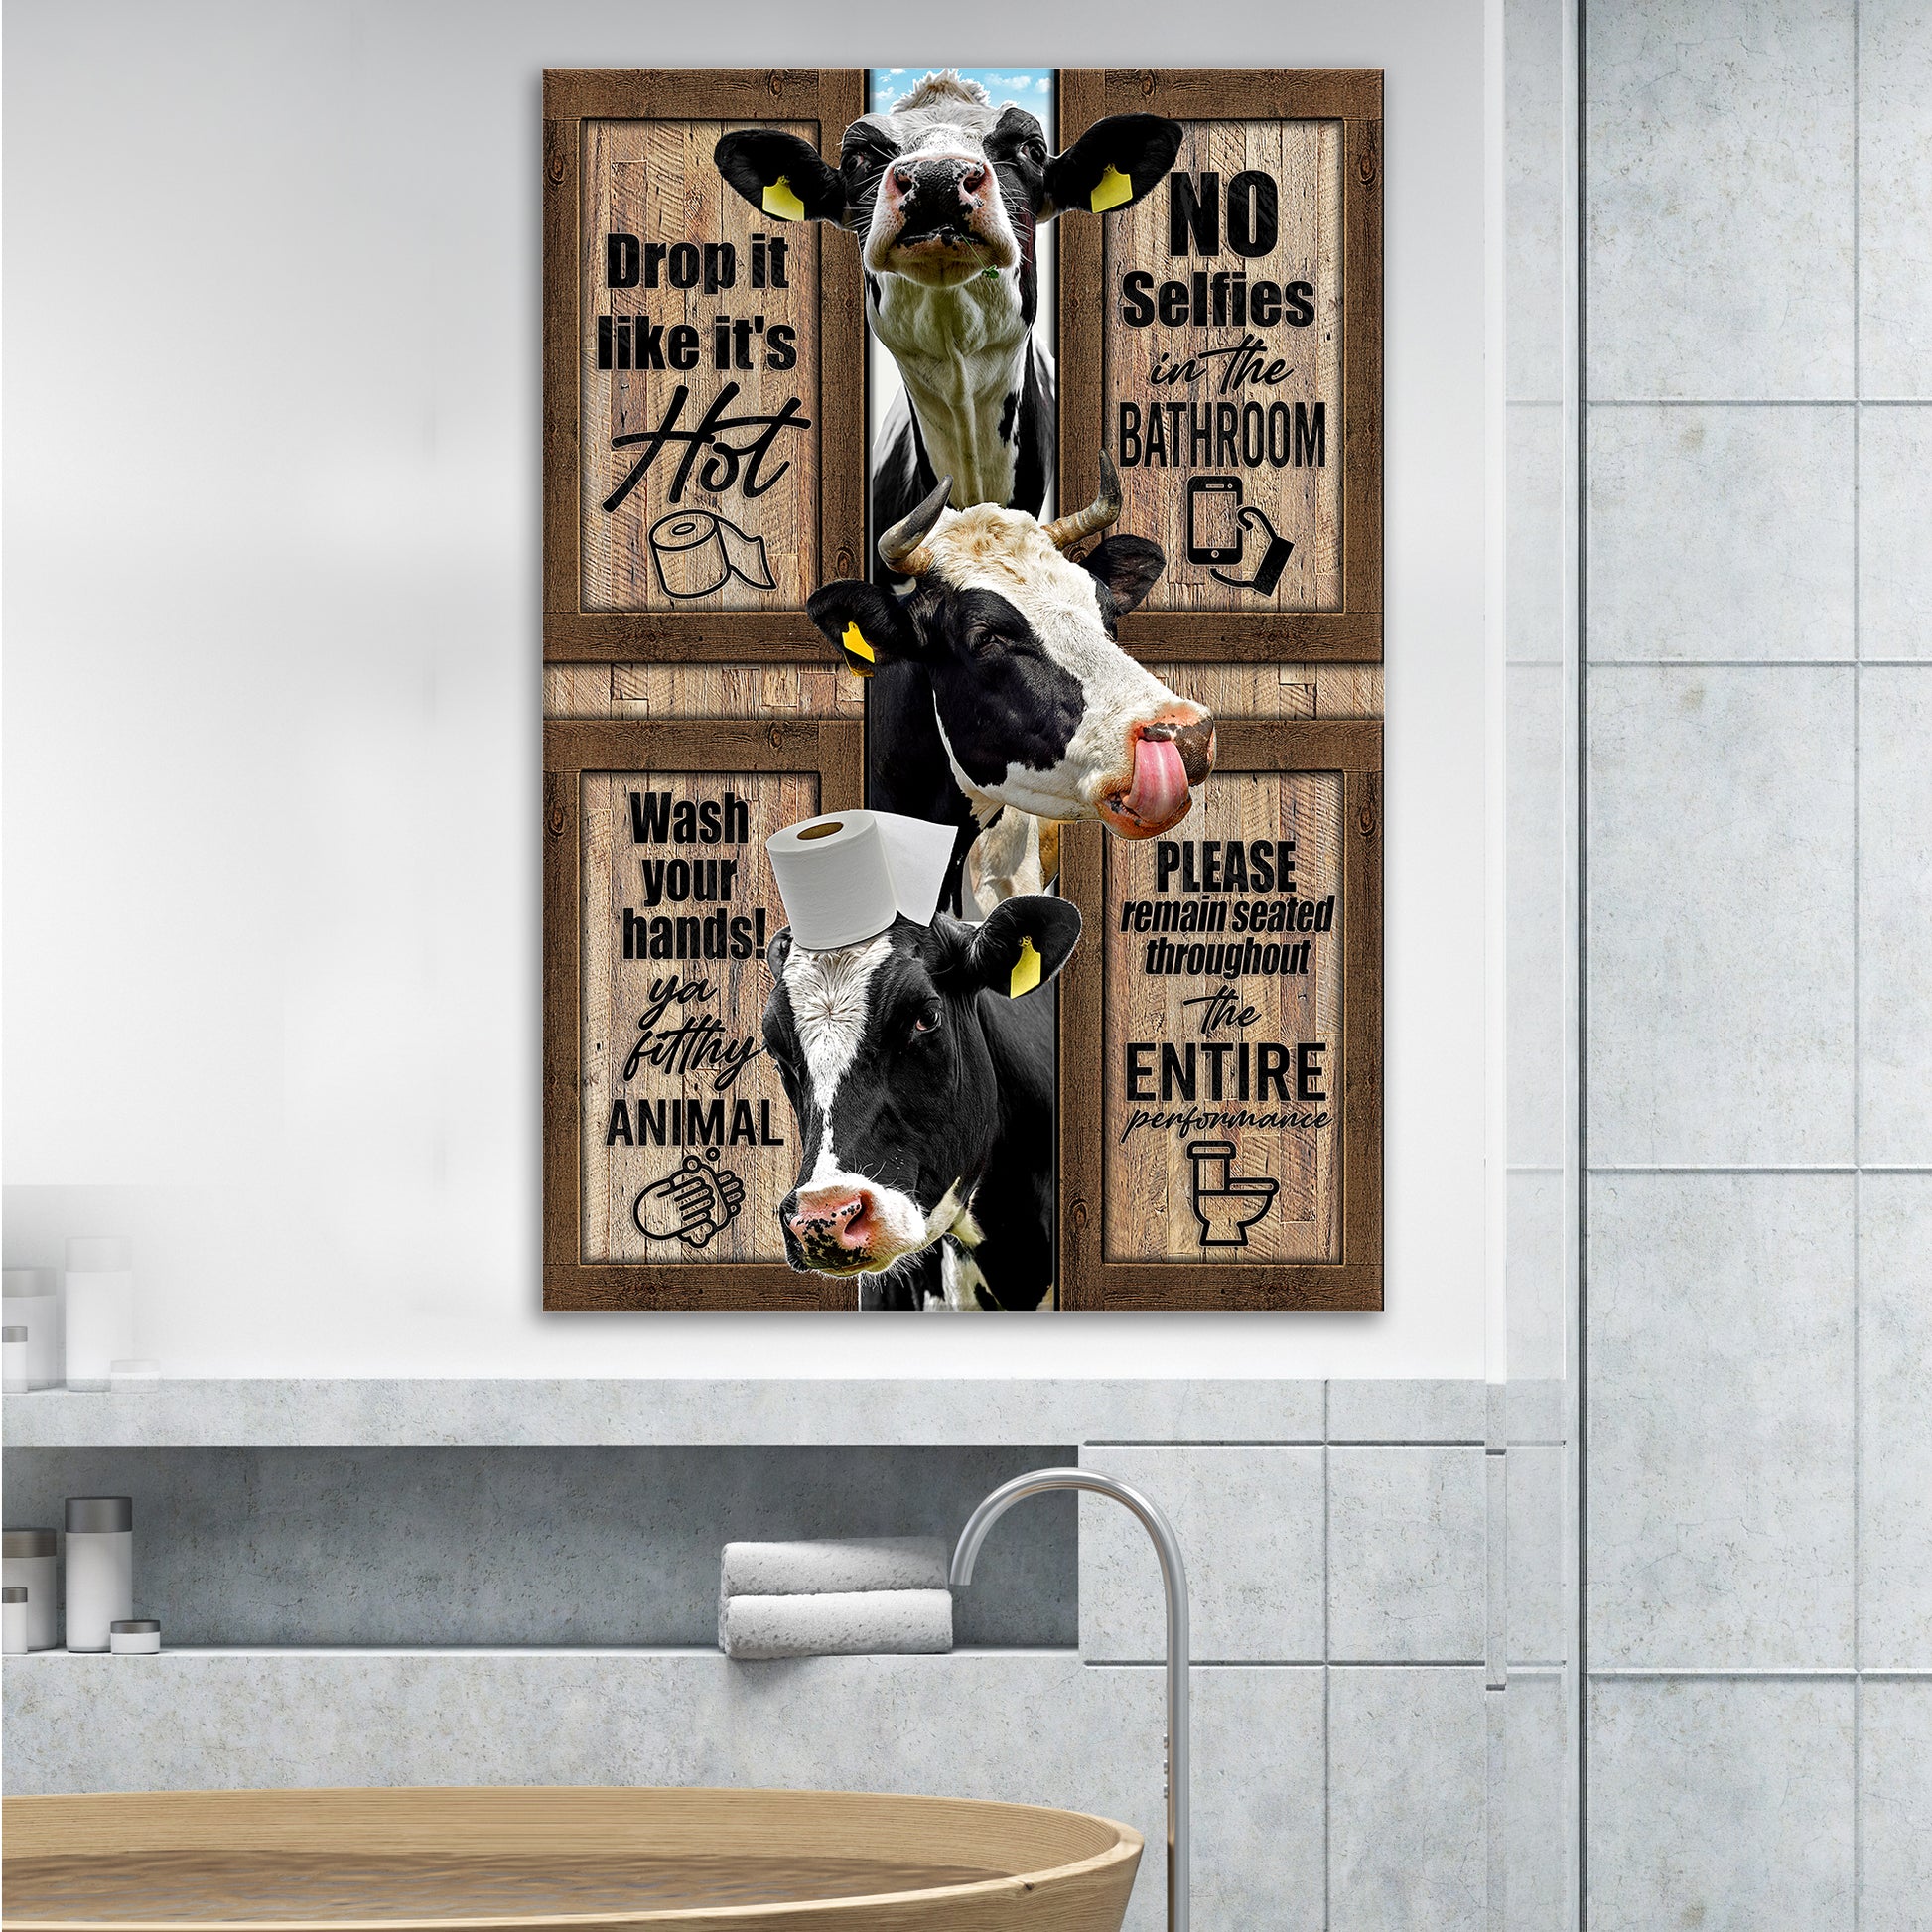 Cow Bathroom Rules Sign II - Image by Tailored Canvases